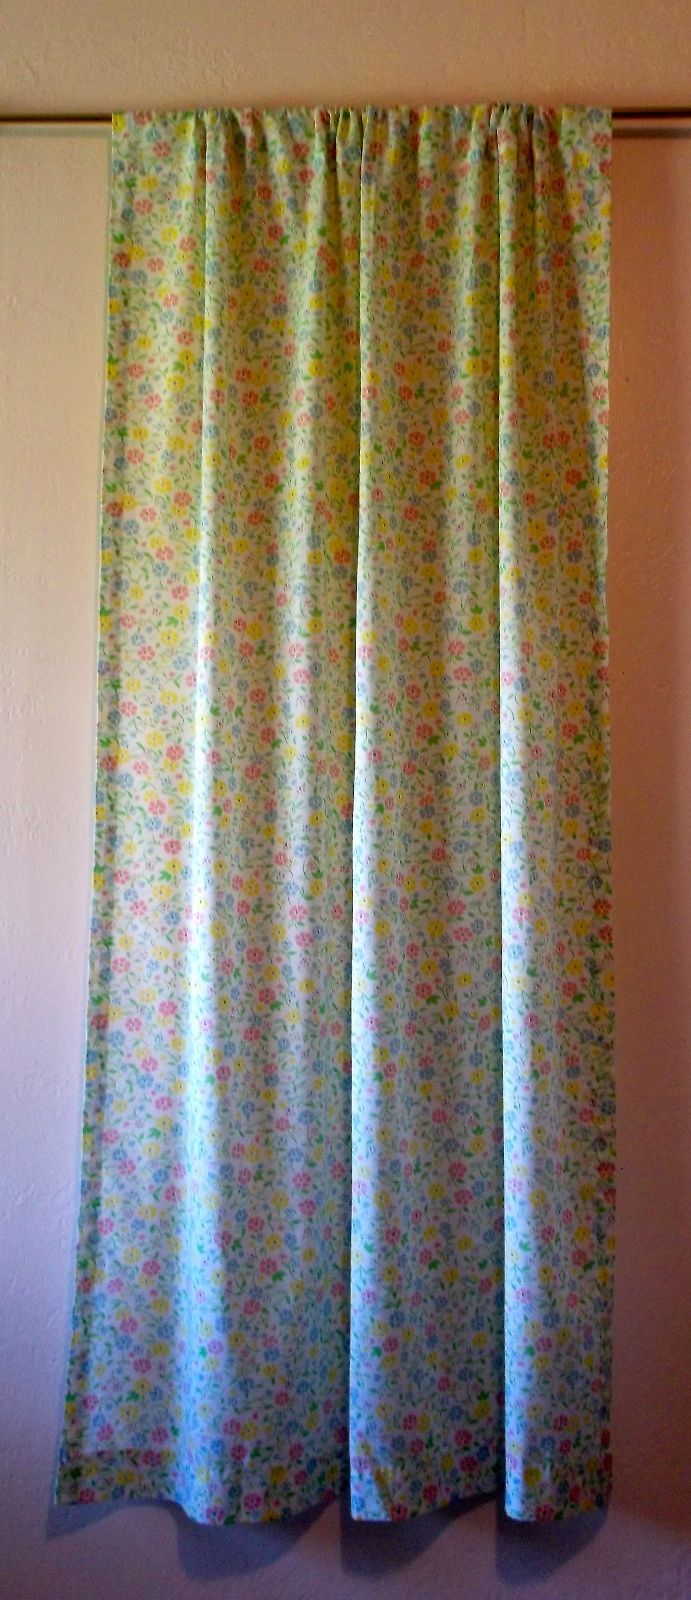 Sears 4 Curtain Panels Vintage 70s Bright Floral 24